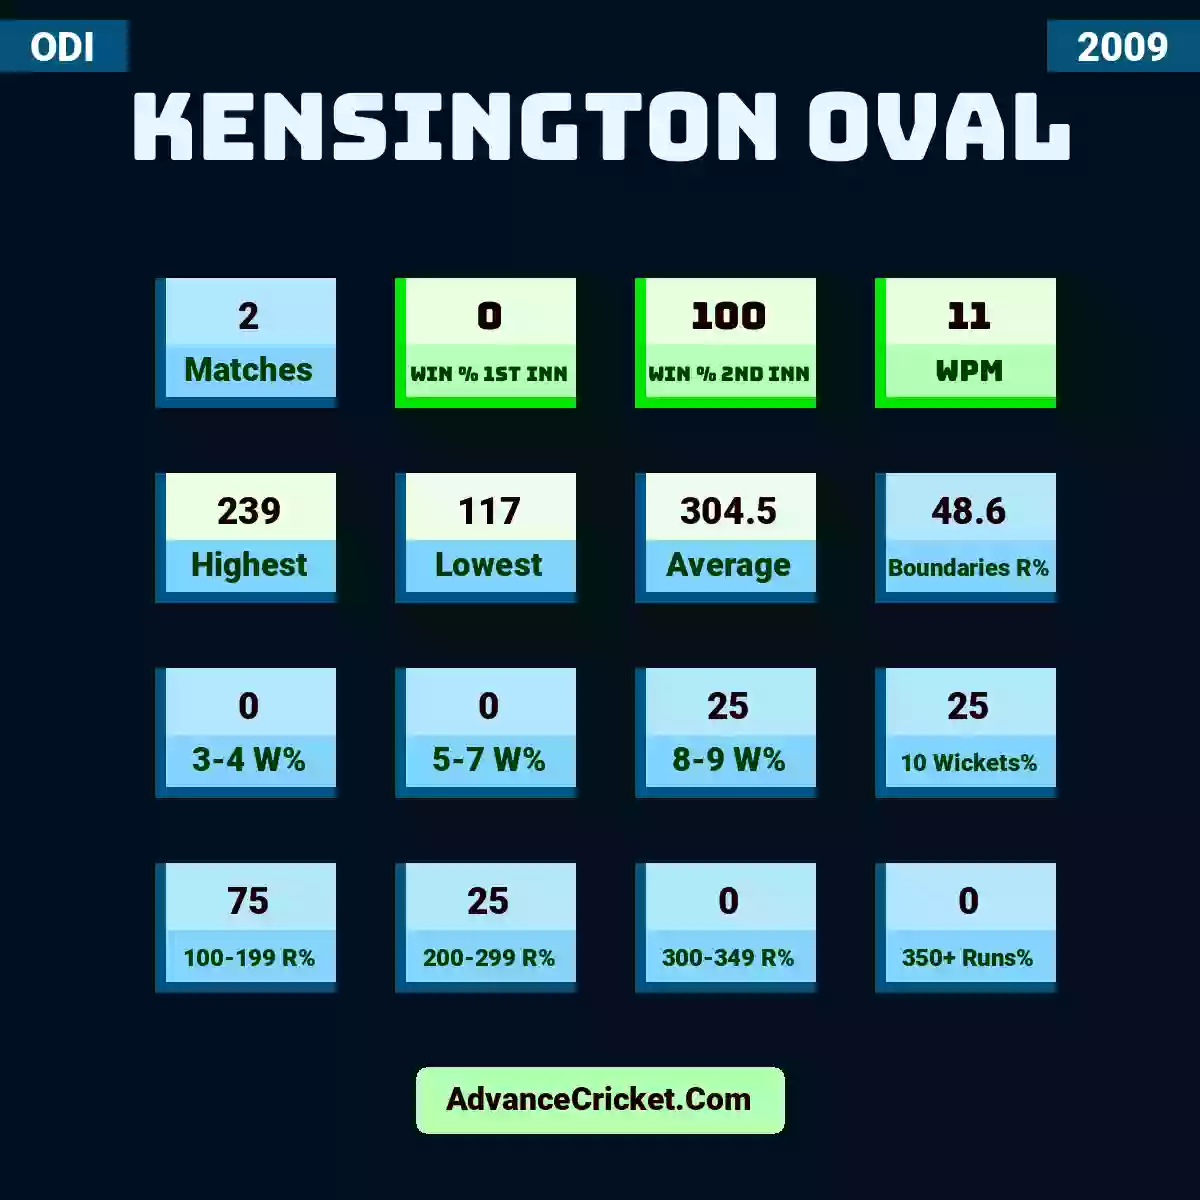 Image showing Kensington Oval with Matches: 2, Win % 1st Inn: 0, Win % 2nd Inn: 100, WPM: 11, Highest: 239, Lowest: 117, Average: 304.5, Boundaries R%: 48.6, 3-4 W%: 0, 5-7 W%: 0, 8-9 W%: 25, 10 Wickets%: 25, 100-199 R%: 75, 200-299 R%: 25, 300-349 R%: 0, 350+ Runs%: 0.